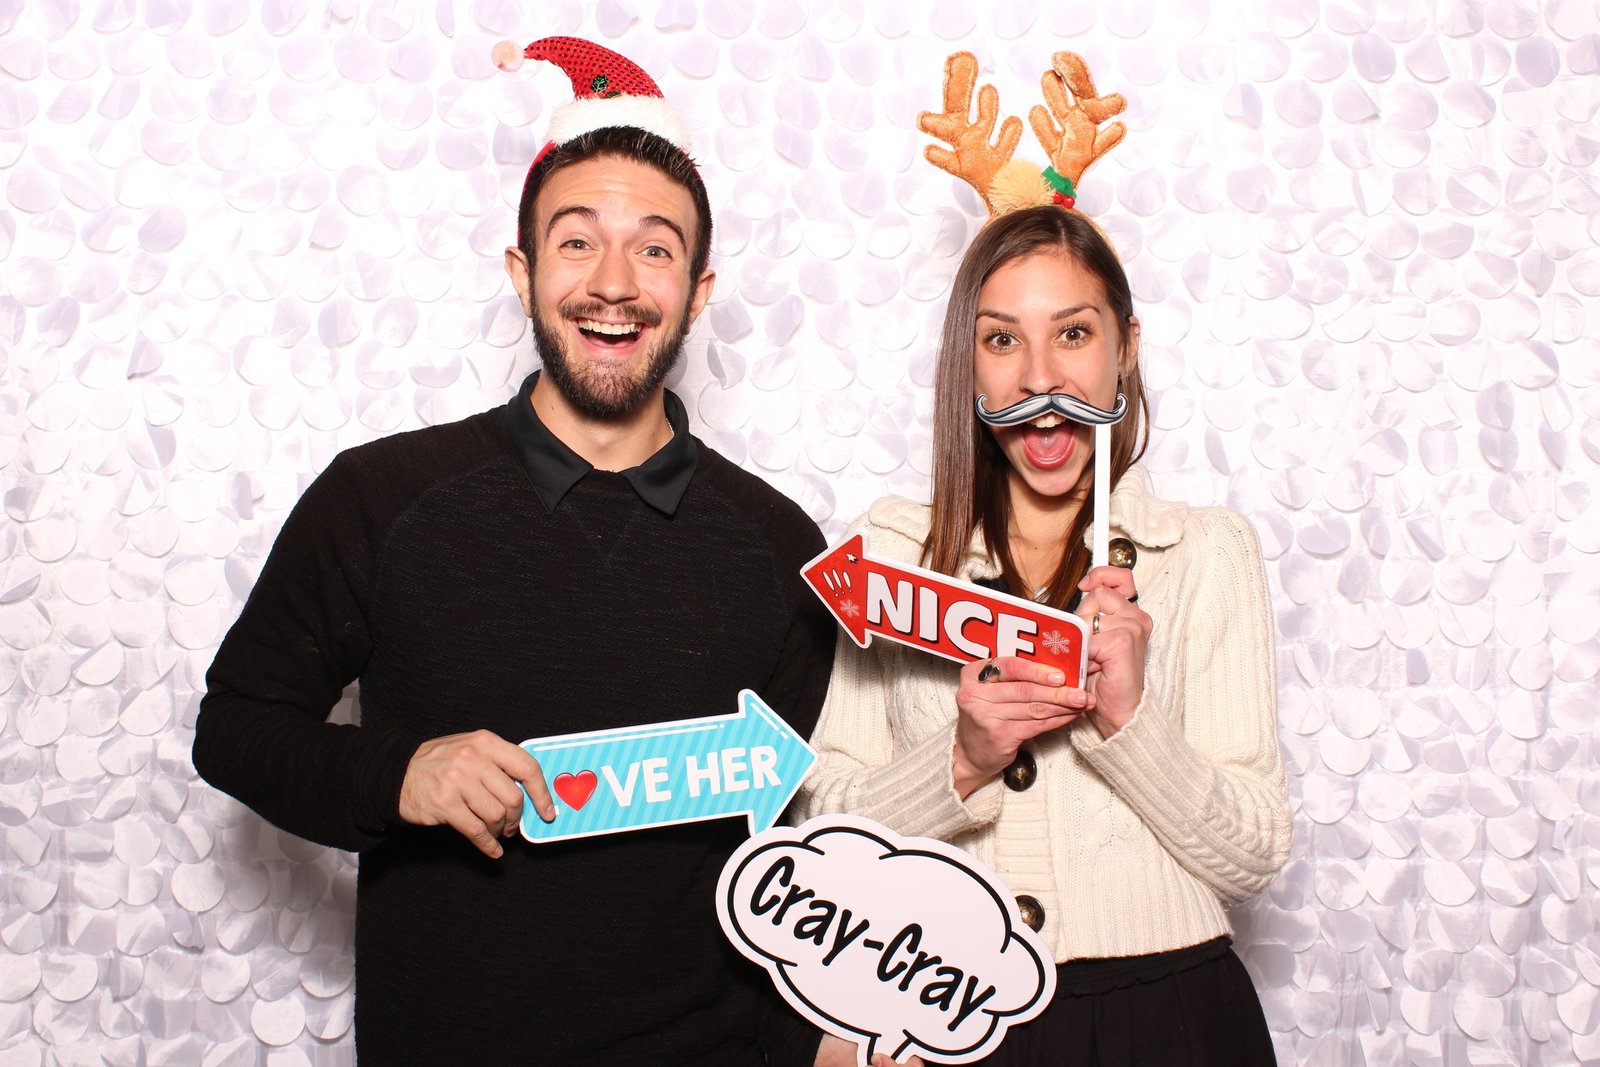 photobooth, prints, props, couple